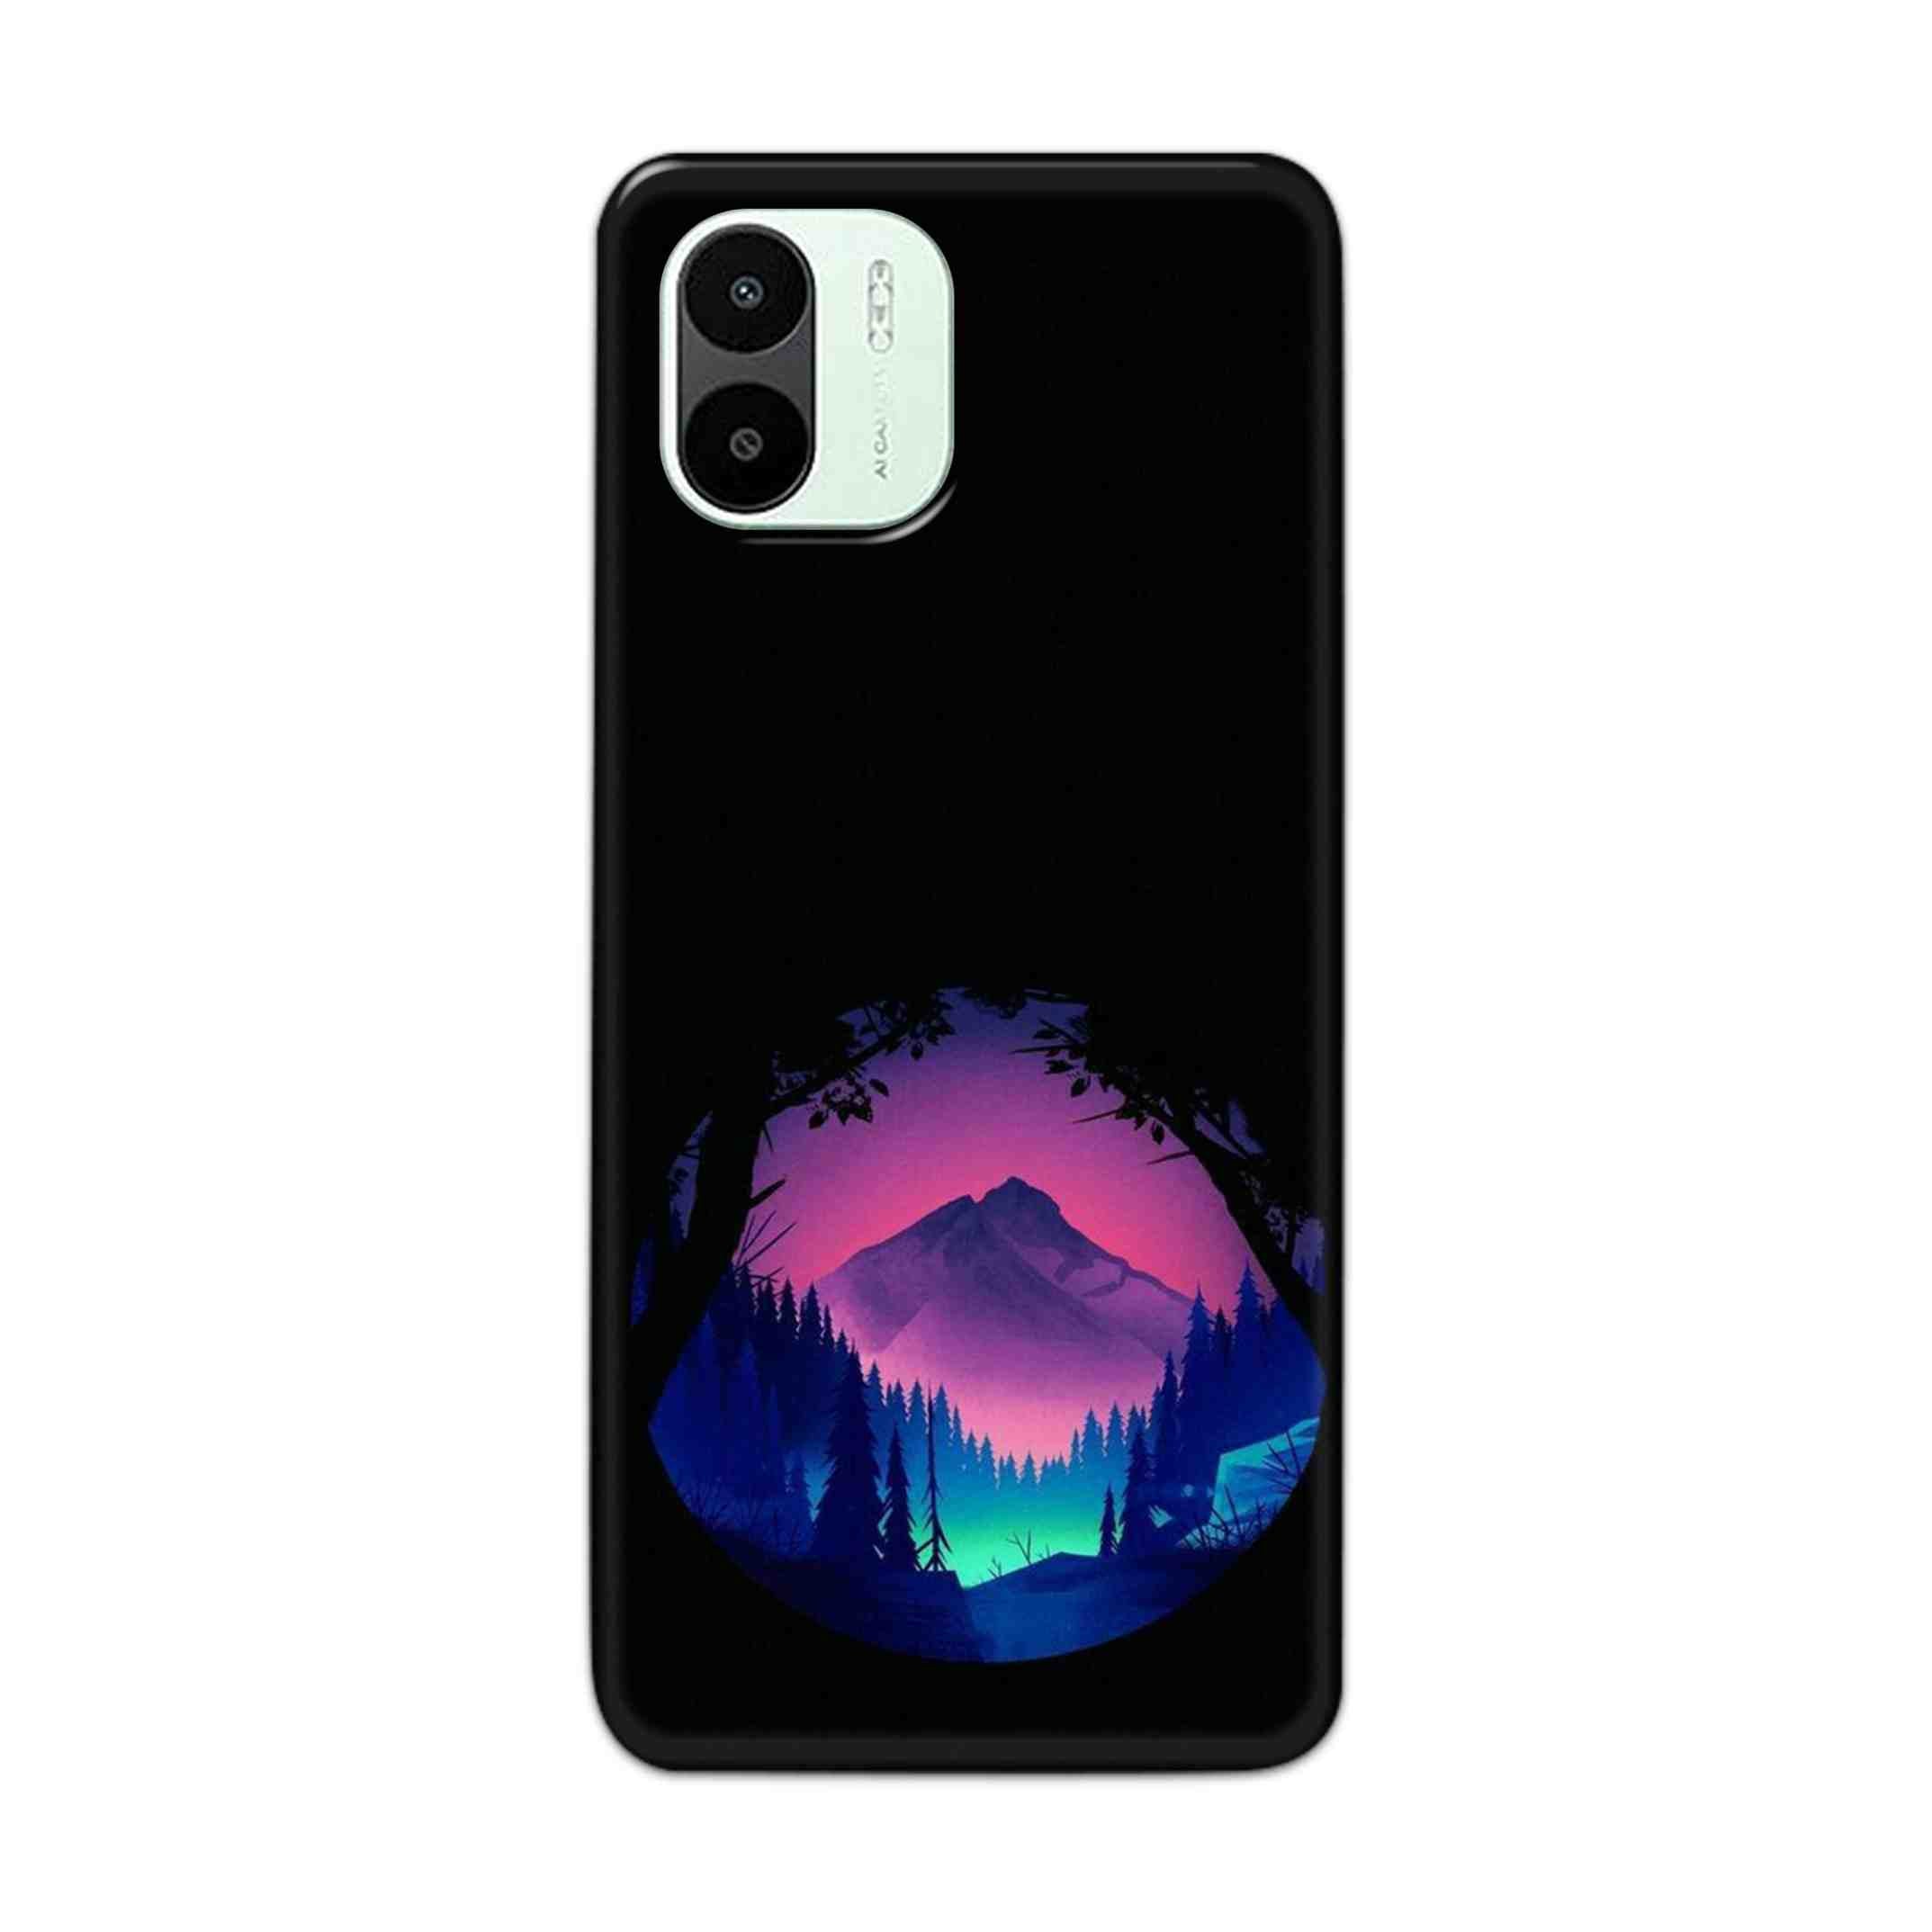 Buy Neon Tables Hard Back Mobile Phone Case Cover For Xiaomi Redmi A1 5G Online